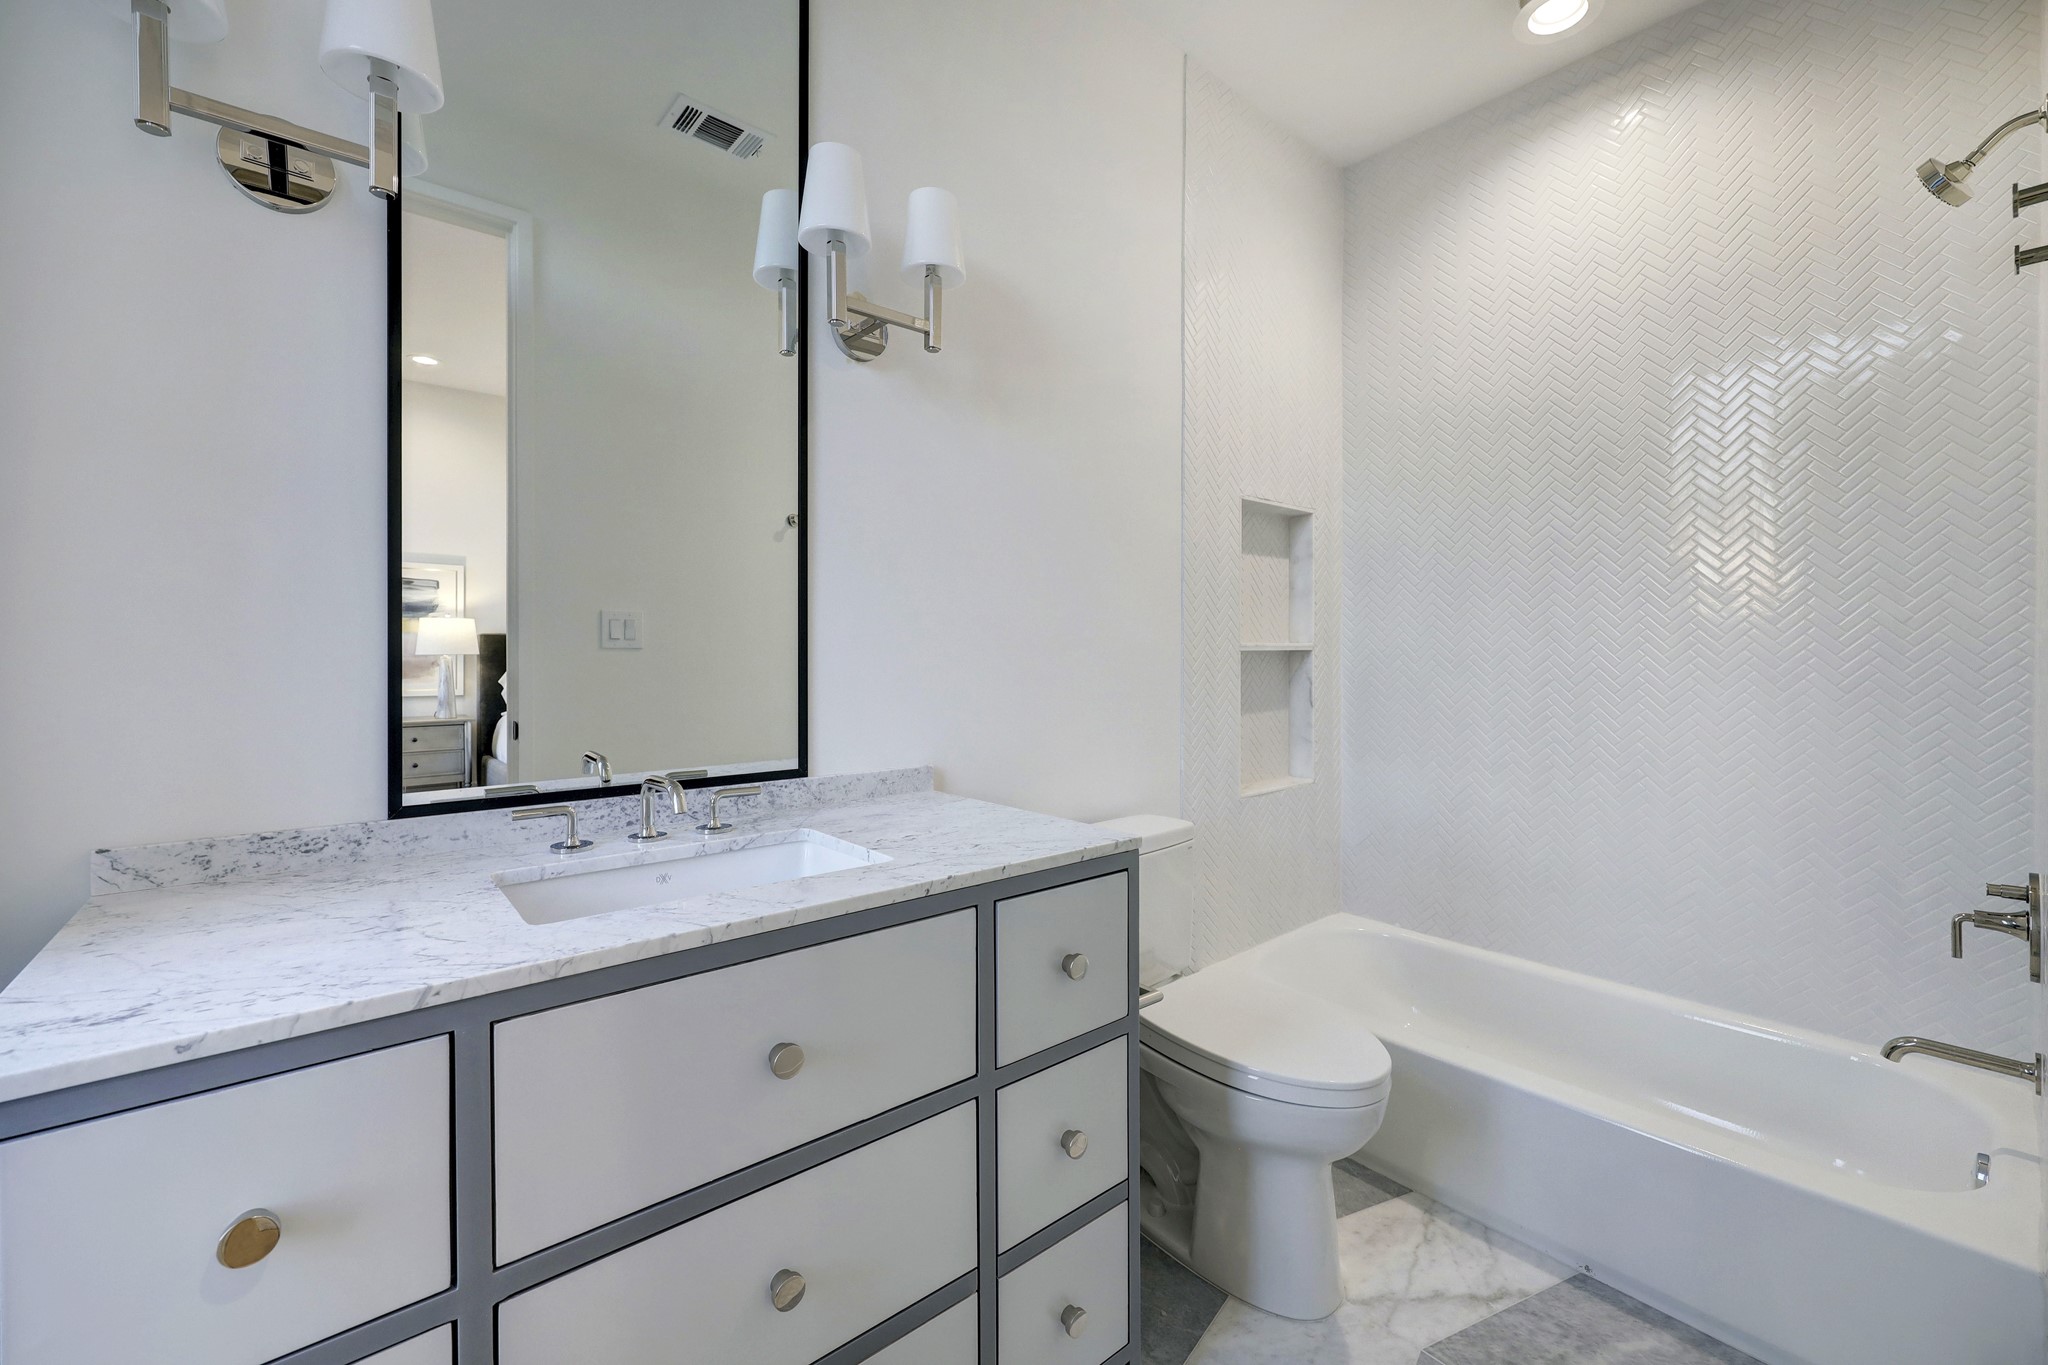 Bathroom #2  Every bathroom is this home is gorgeous!  Custom cabinet, slab marble counter, undermount sink, high end plumbing fixtures, framed mirror, pendent lights, glassy finish subway tile in a herringbone pattern surround the tub/shower. and more ..  Absolutely stunning!!